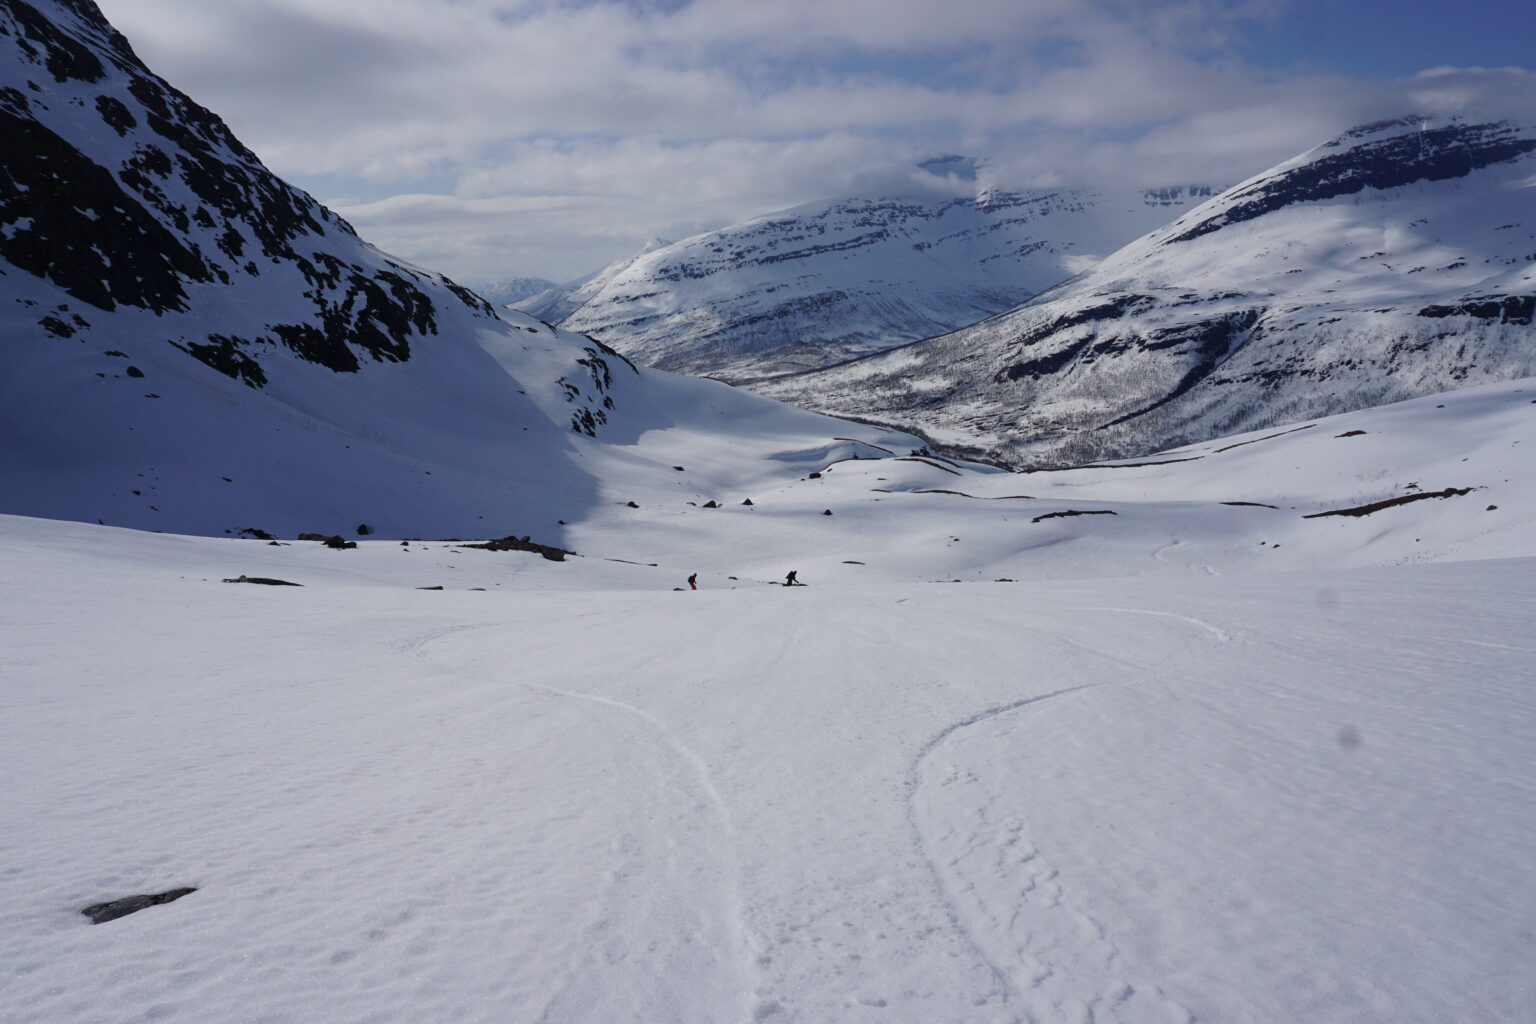 Riding back down to the car in the Tamokdalen backcountry